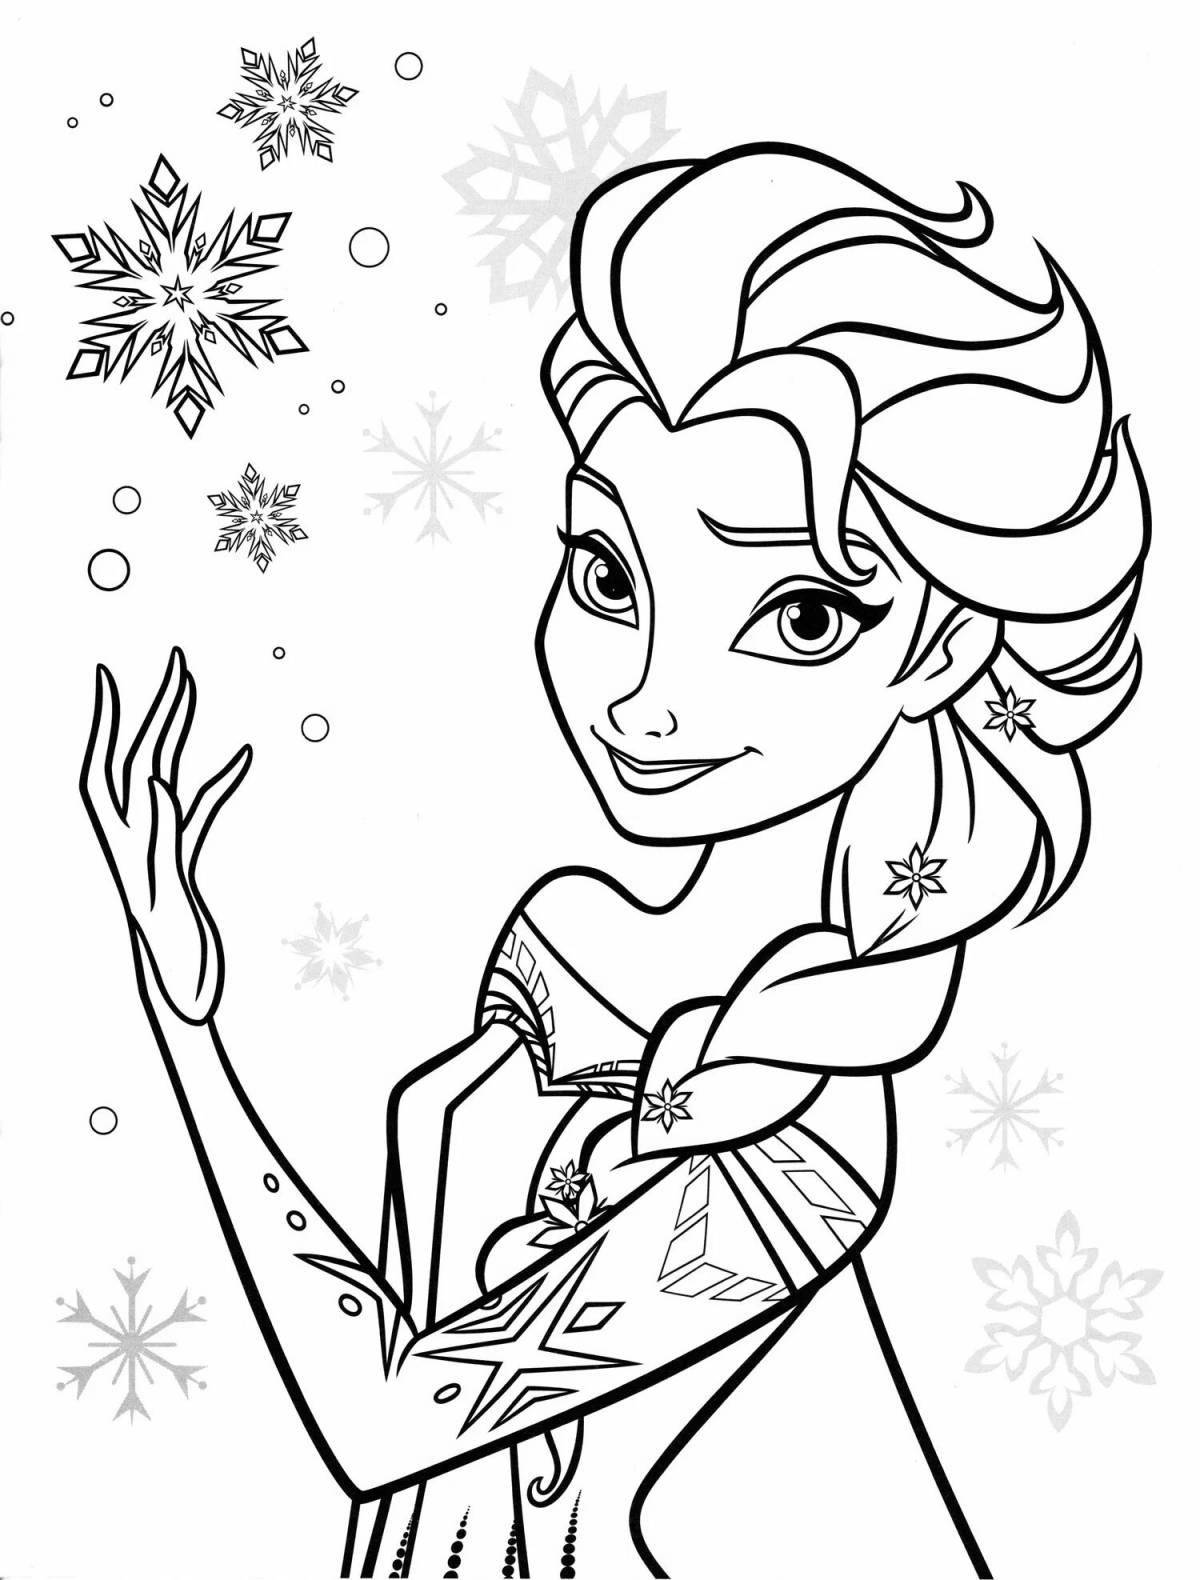 Cute coloring book frozen 2 for girls